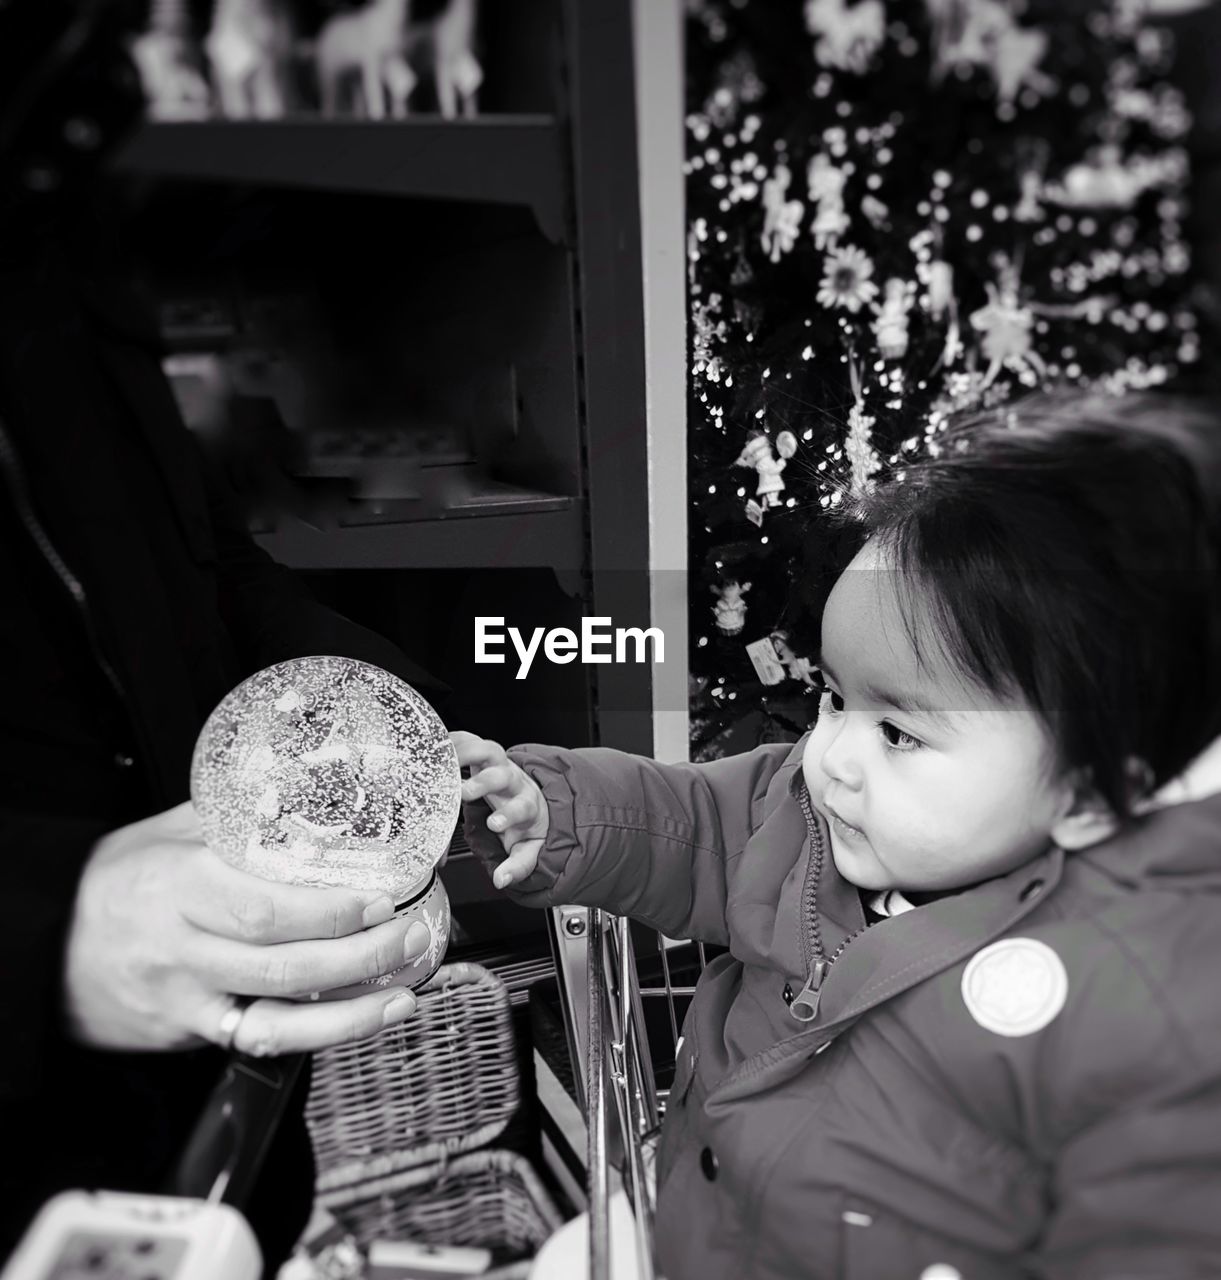 Cute baby girl looking at toy in store